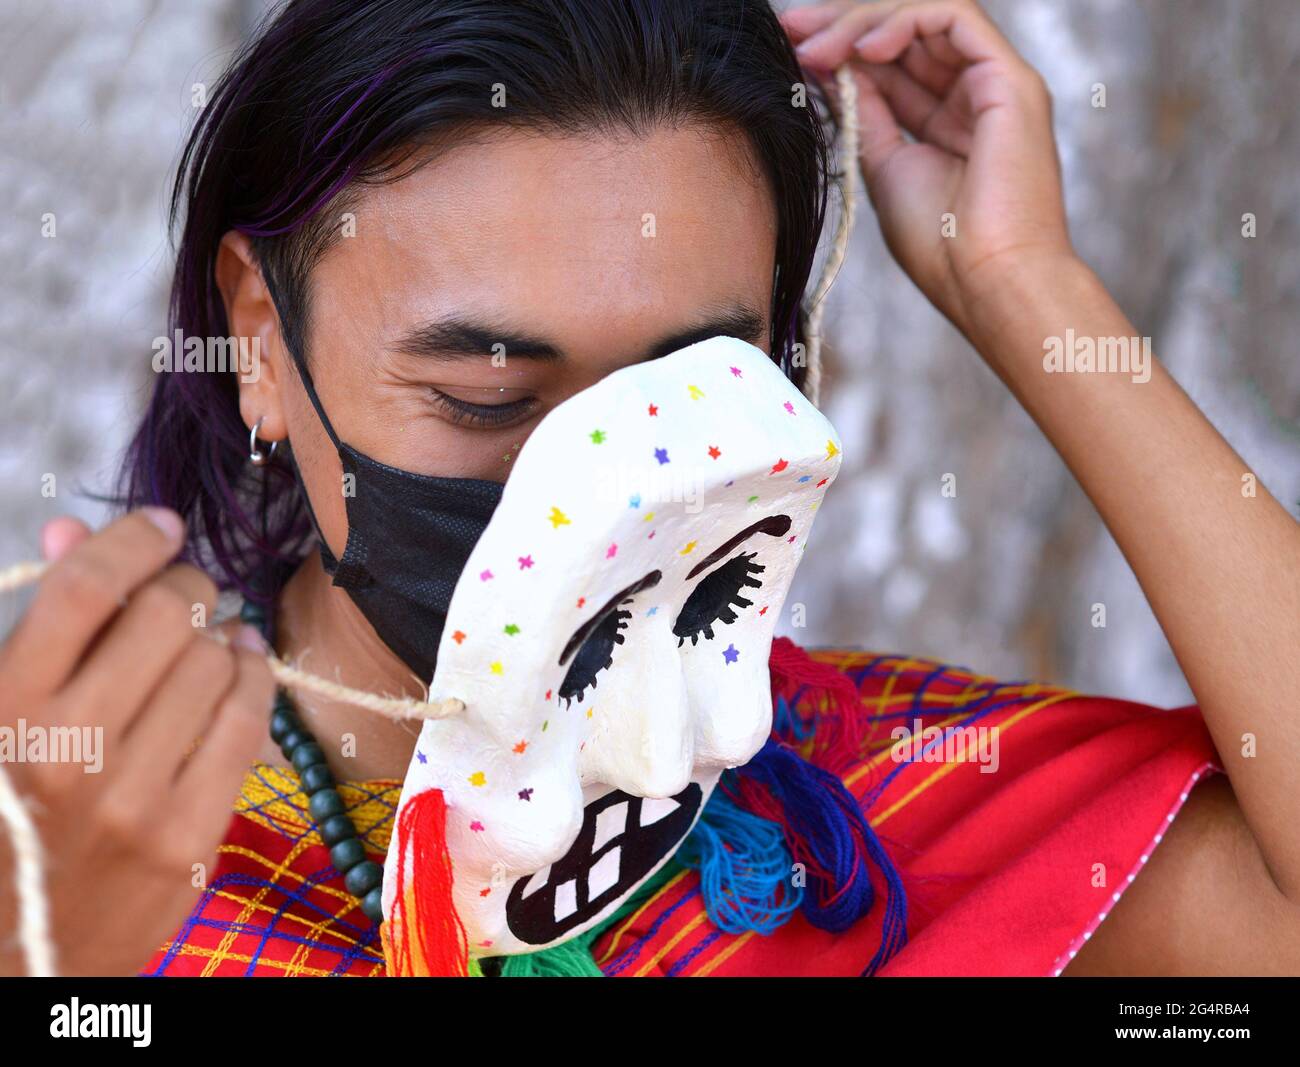 Young Mexican artist (mask maker, mask painter) removes one of his hand painted papier-mache masks and shows a black surgical mask underneath. Stock Photo